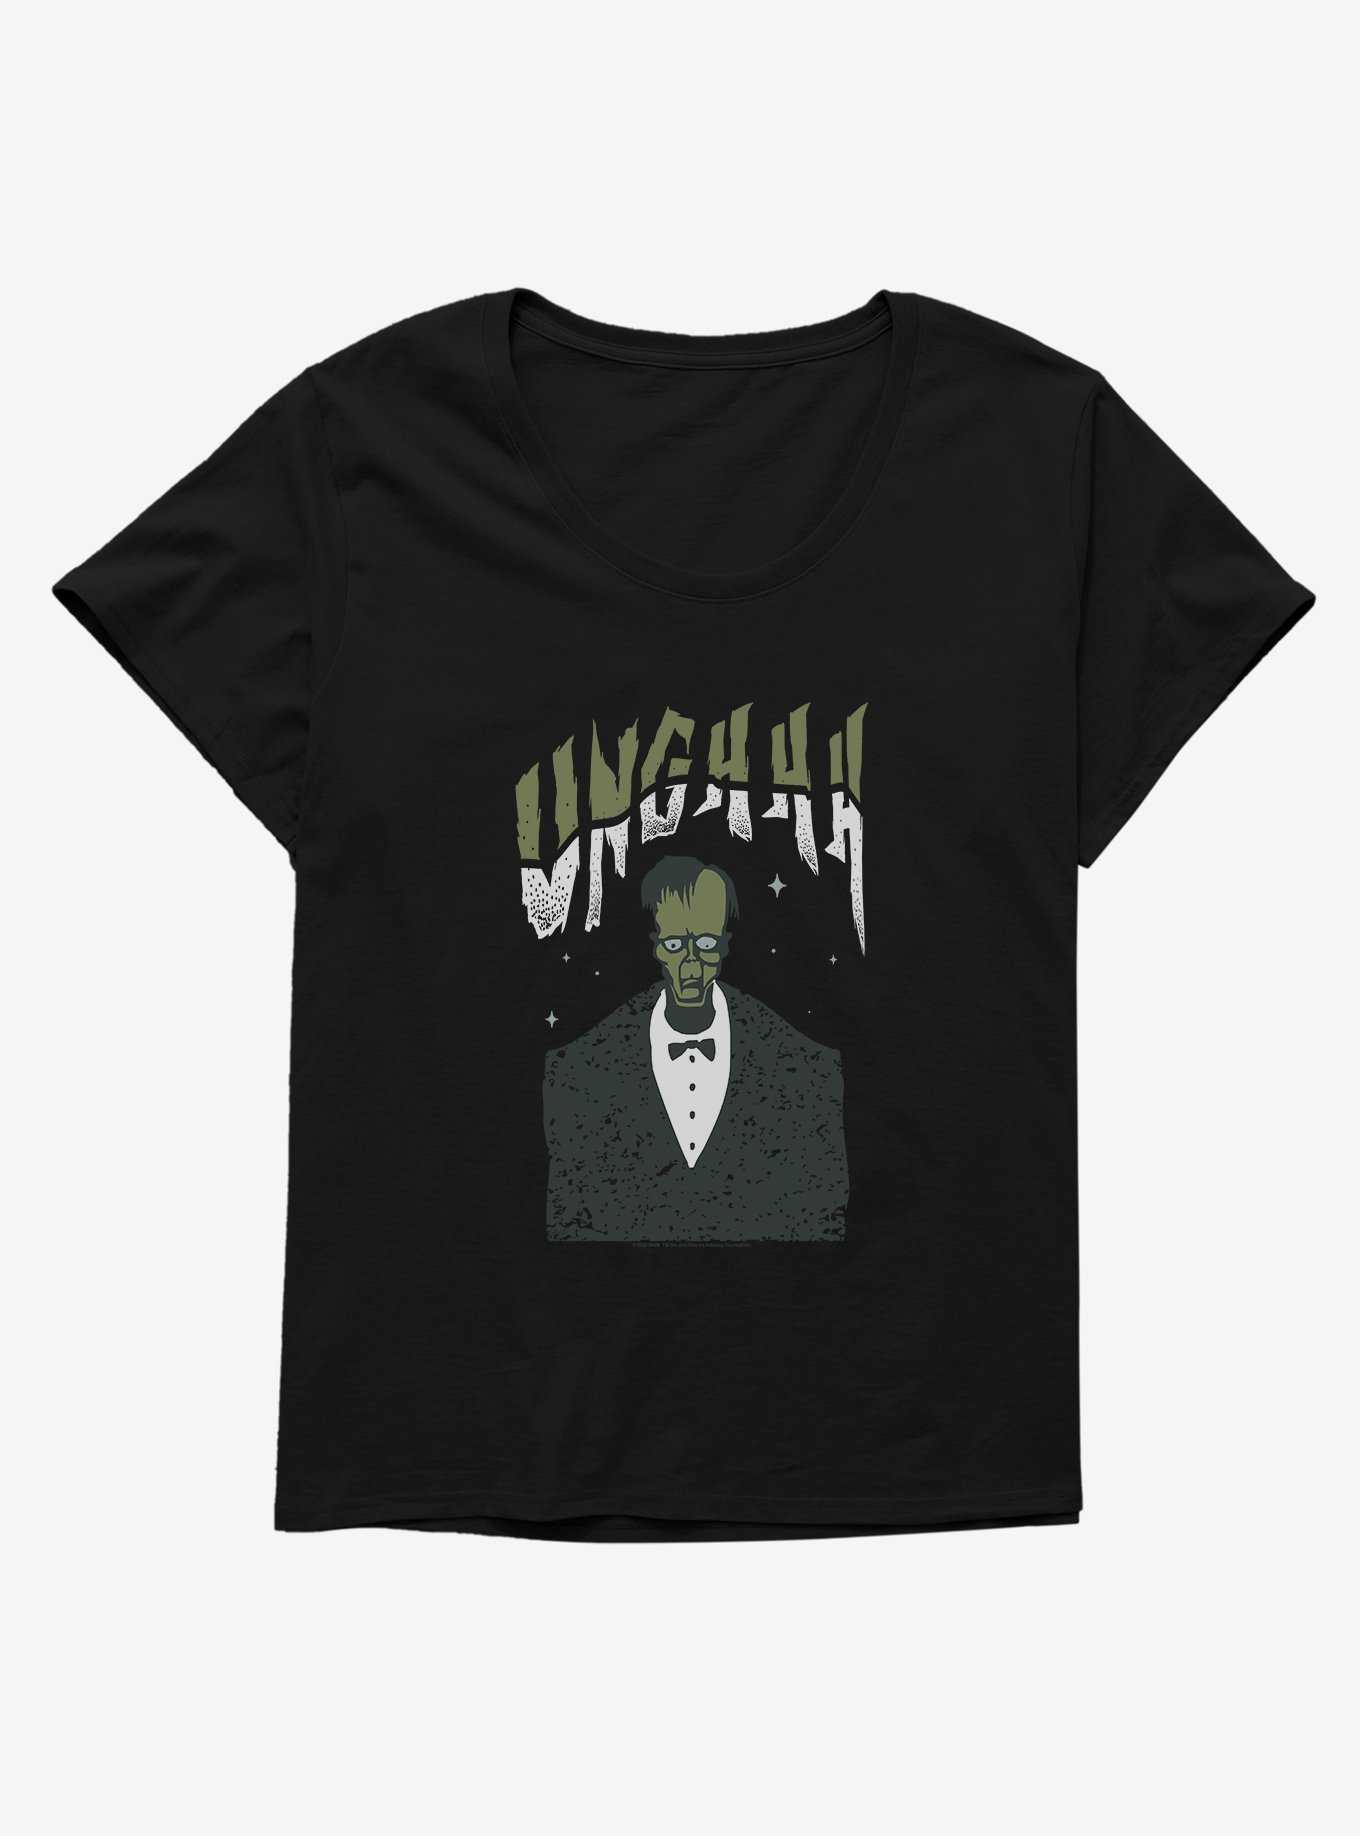 Addams Family Movie Lurch Unghhh Girls T-Shirt Plus Size, , hi-res